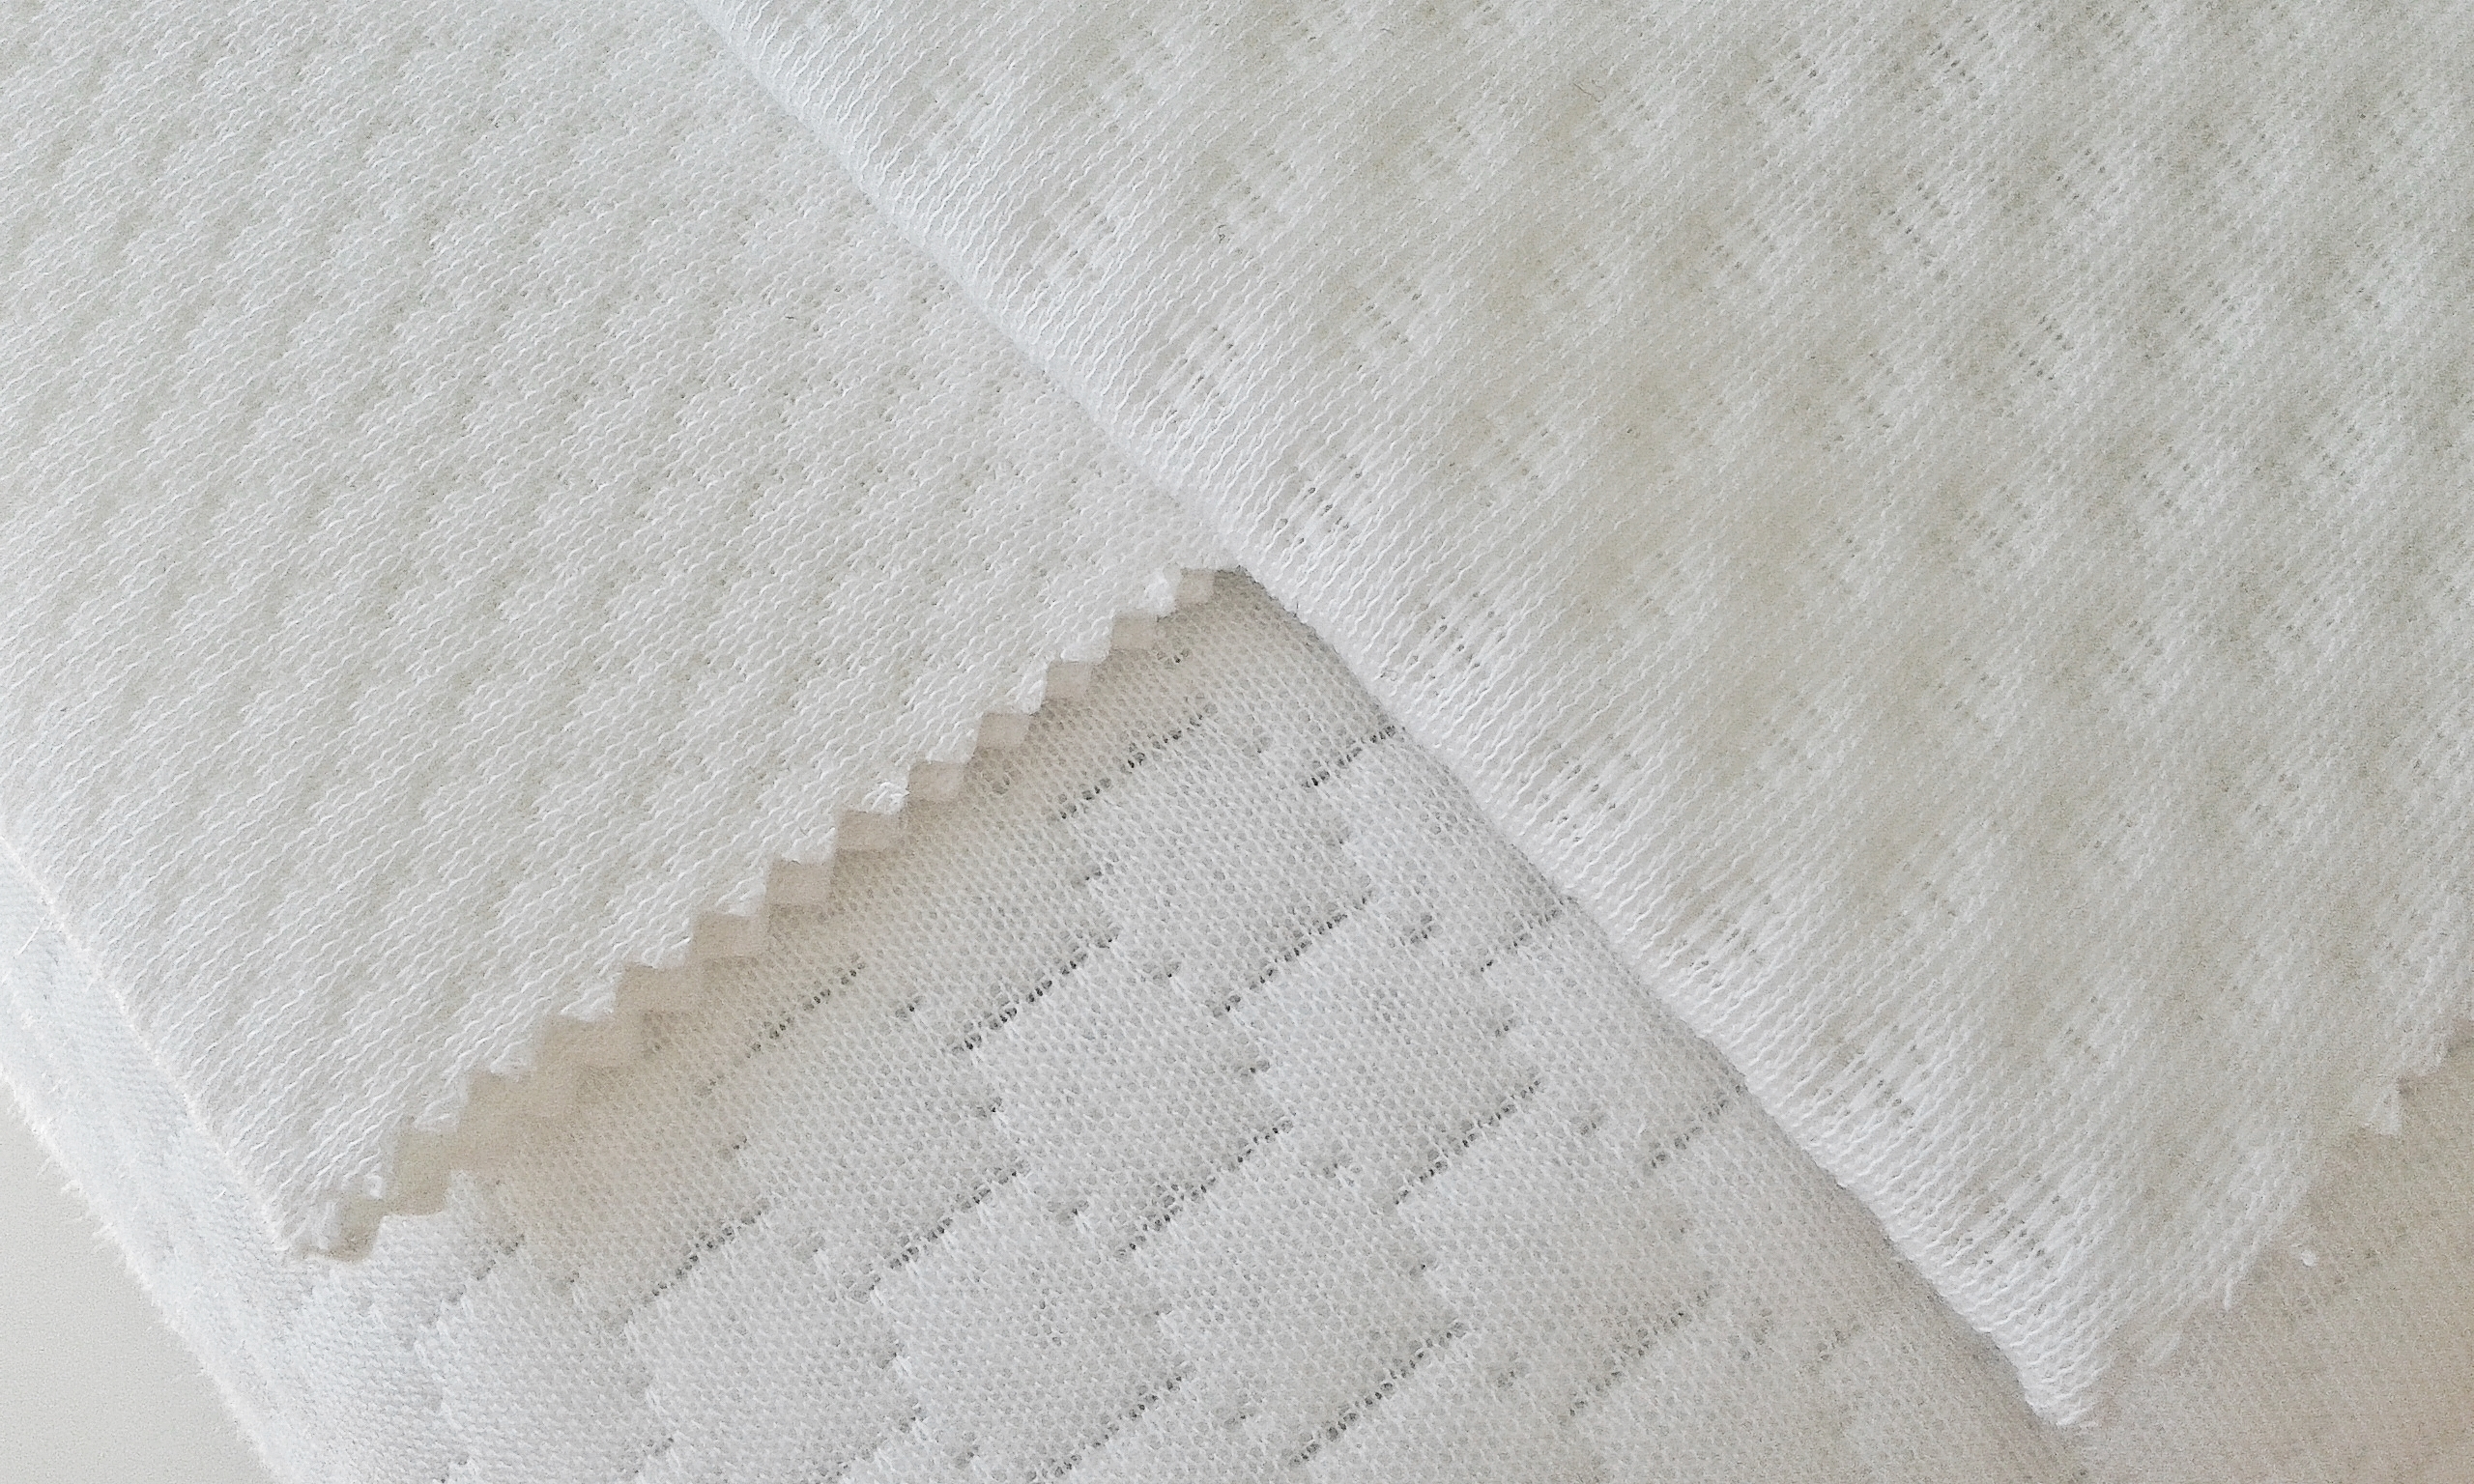 The new Trevira CS mattress cover qualities by Mattes & Ammann © Photo: Trevira GmbH/Mattes & Ammann.